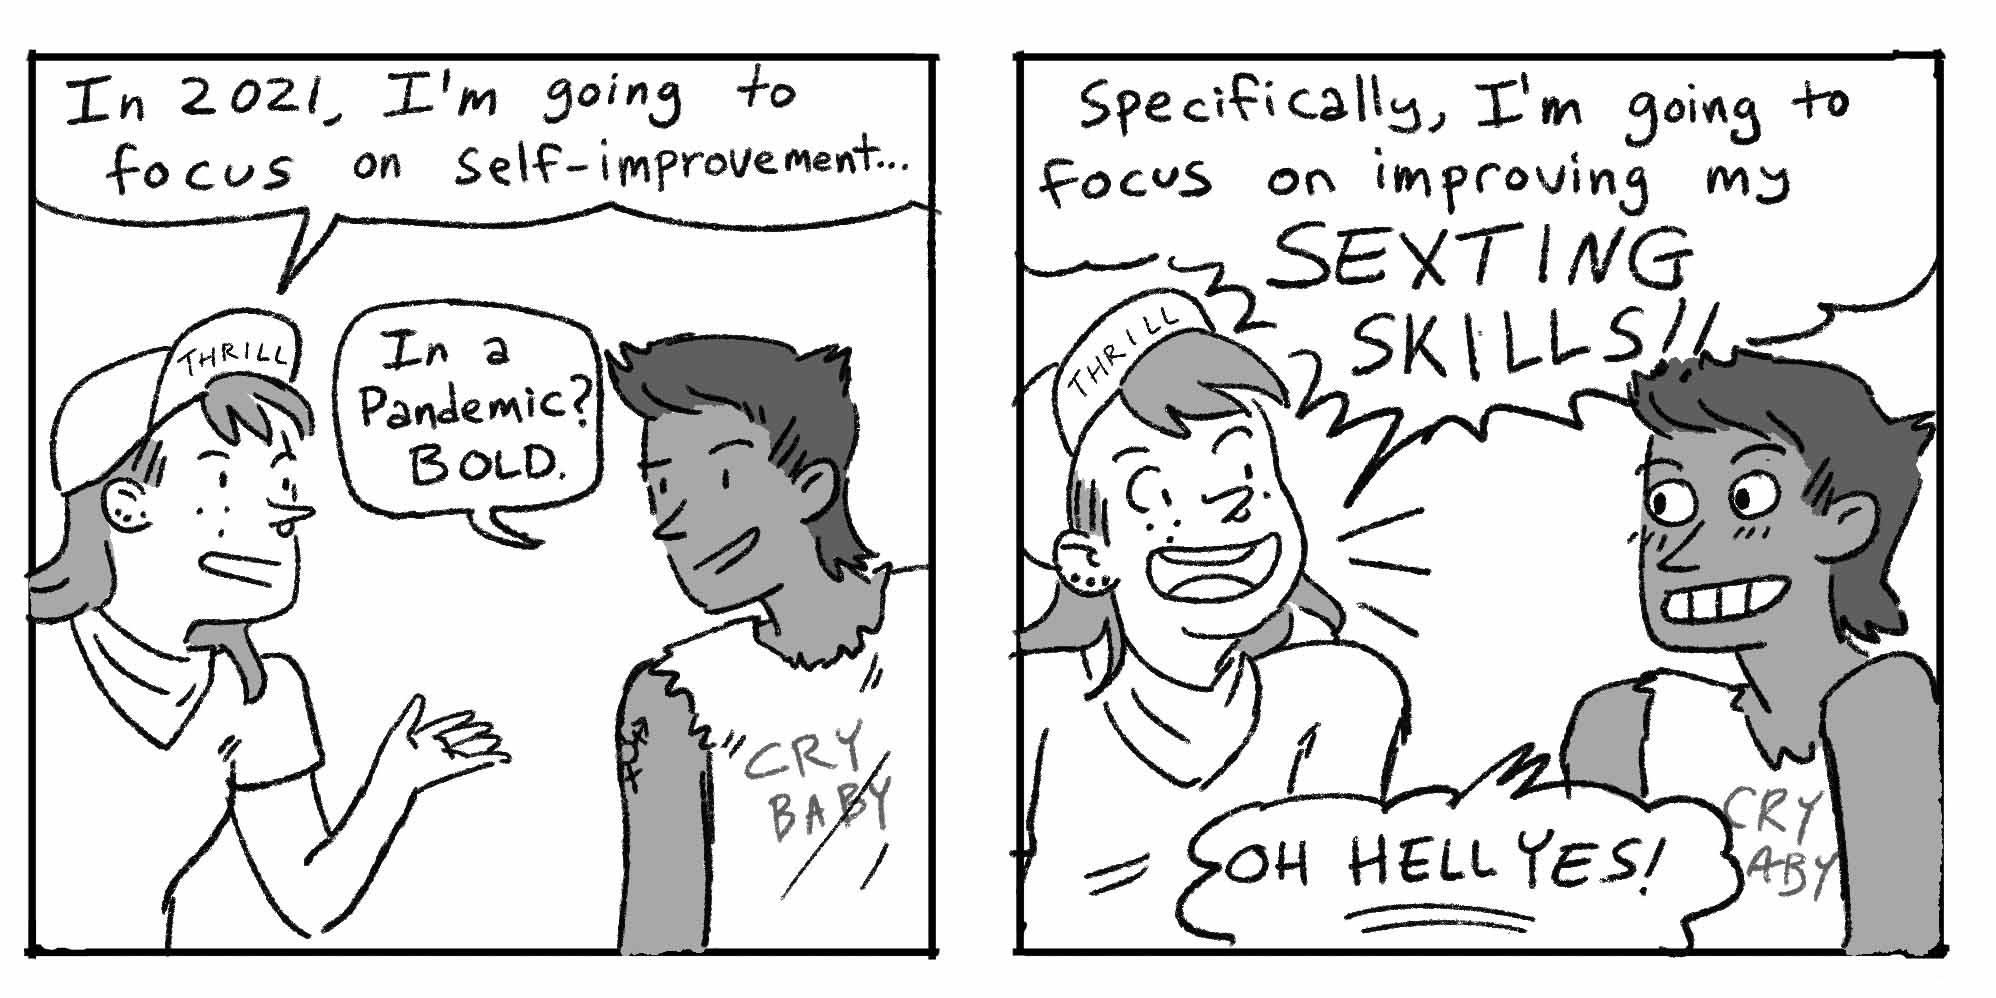 In a black and white hand drawn comic, Scout tells Ari that in 2021 they are going to focus on self-improvement... first and foremost, improving those SEXTING SKILLS!!!